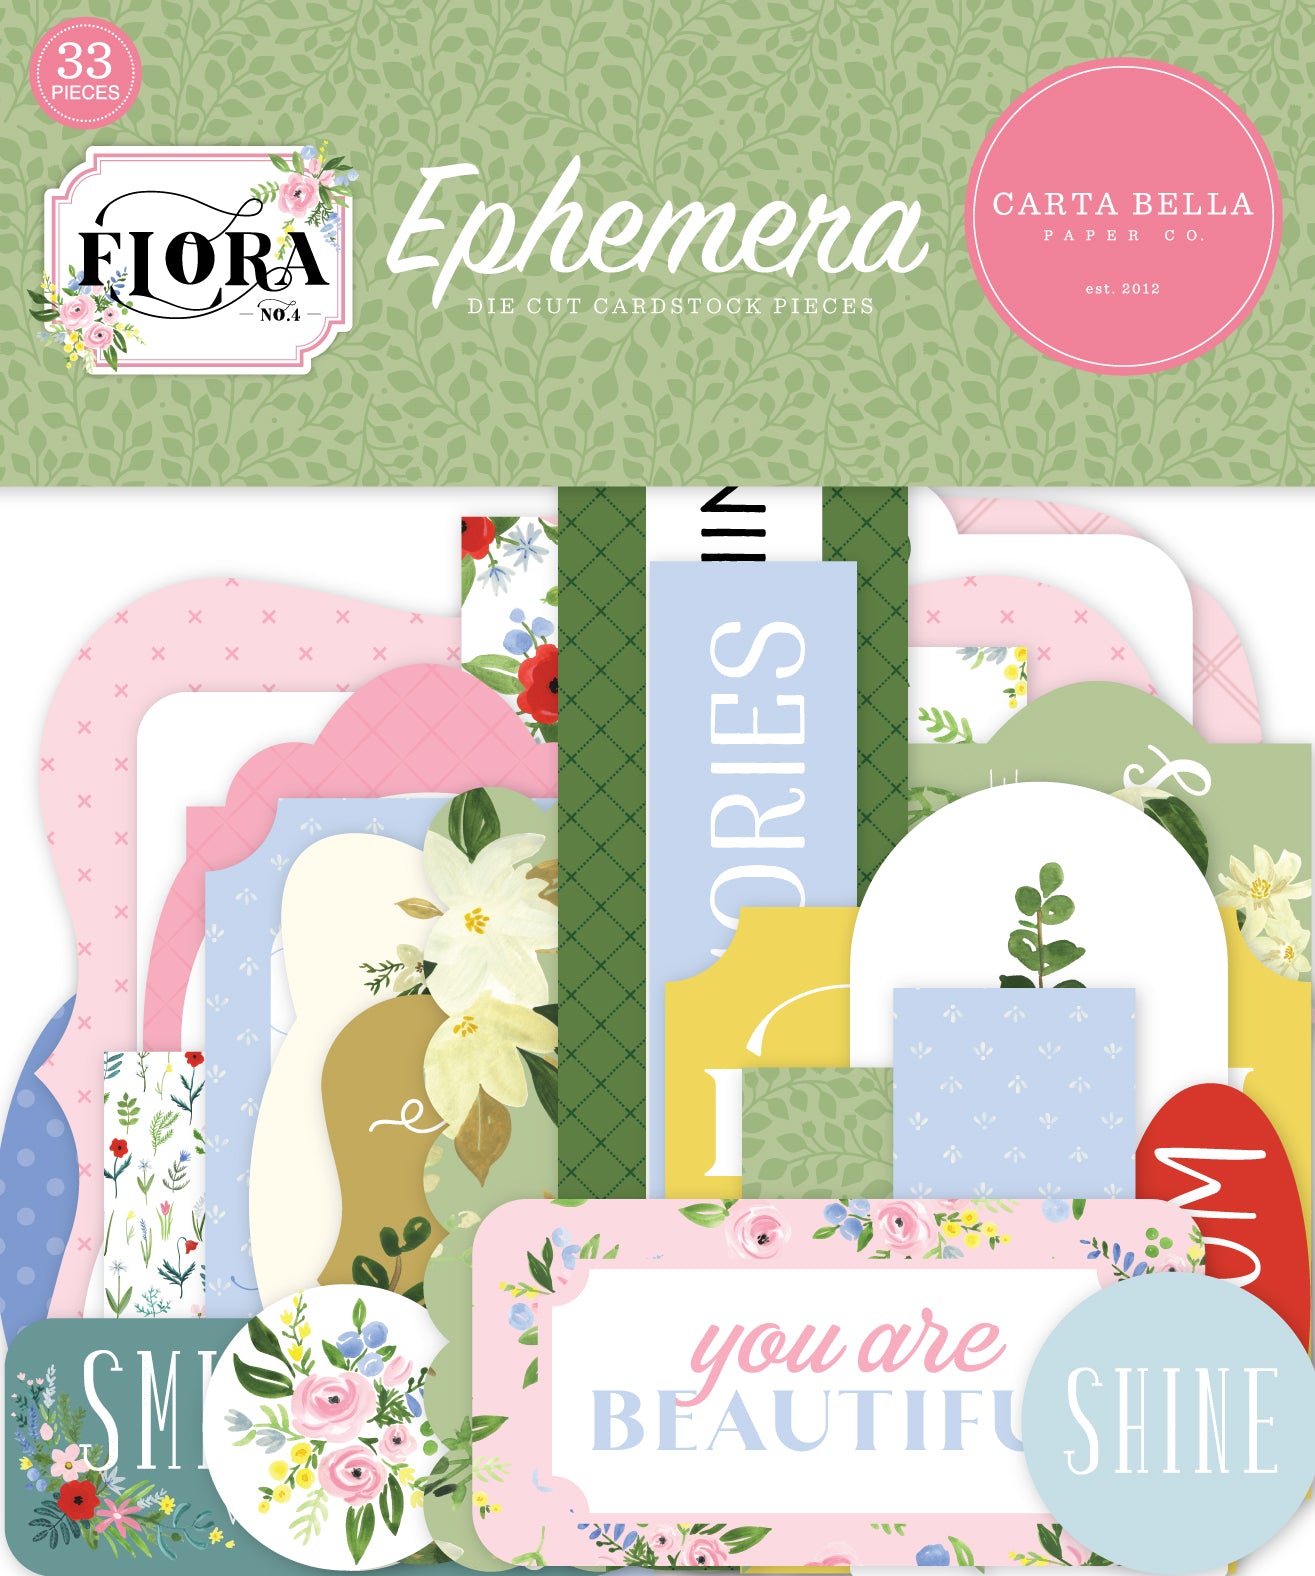 Flora No. 4 Ephemera Die Cut Cardstock Pack.  Pack includes 33 different die-cut shapes ready to embellish any project.